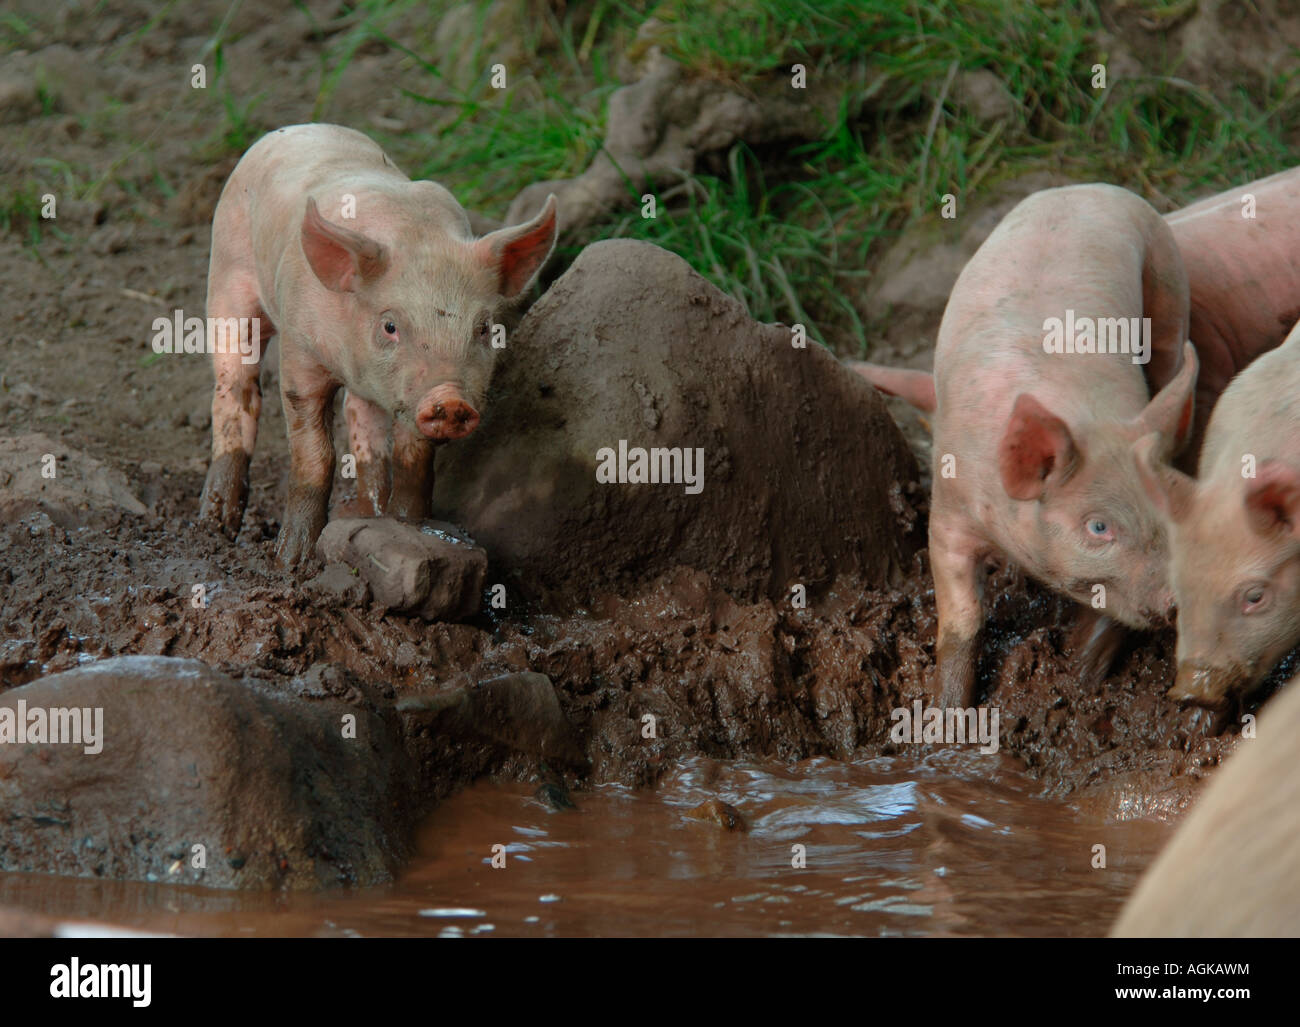 Piglets At A Watering Hole. Stock Photo